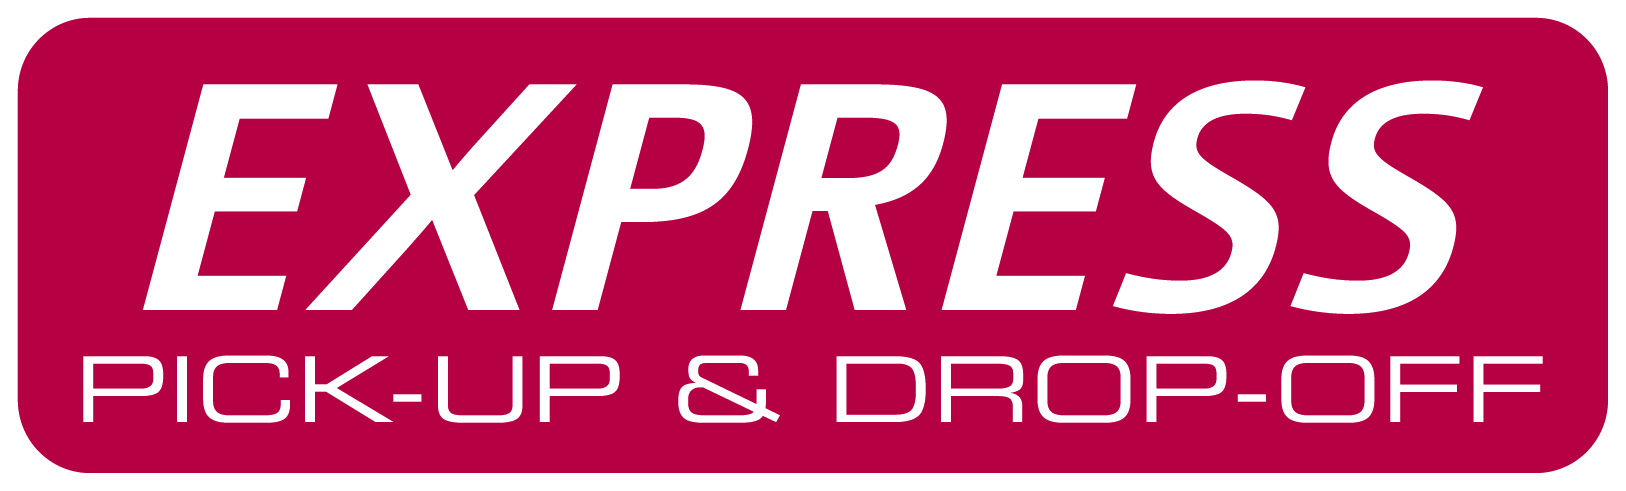 Express pick-up and drop-off